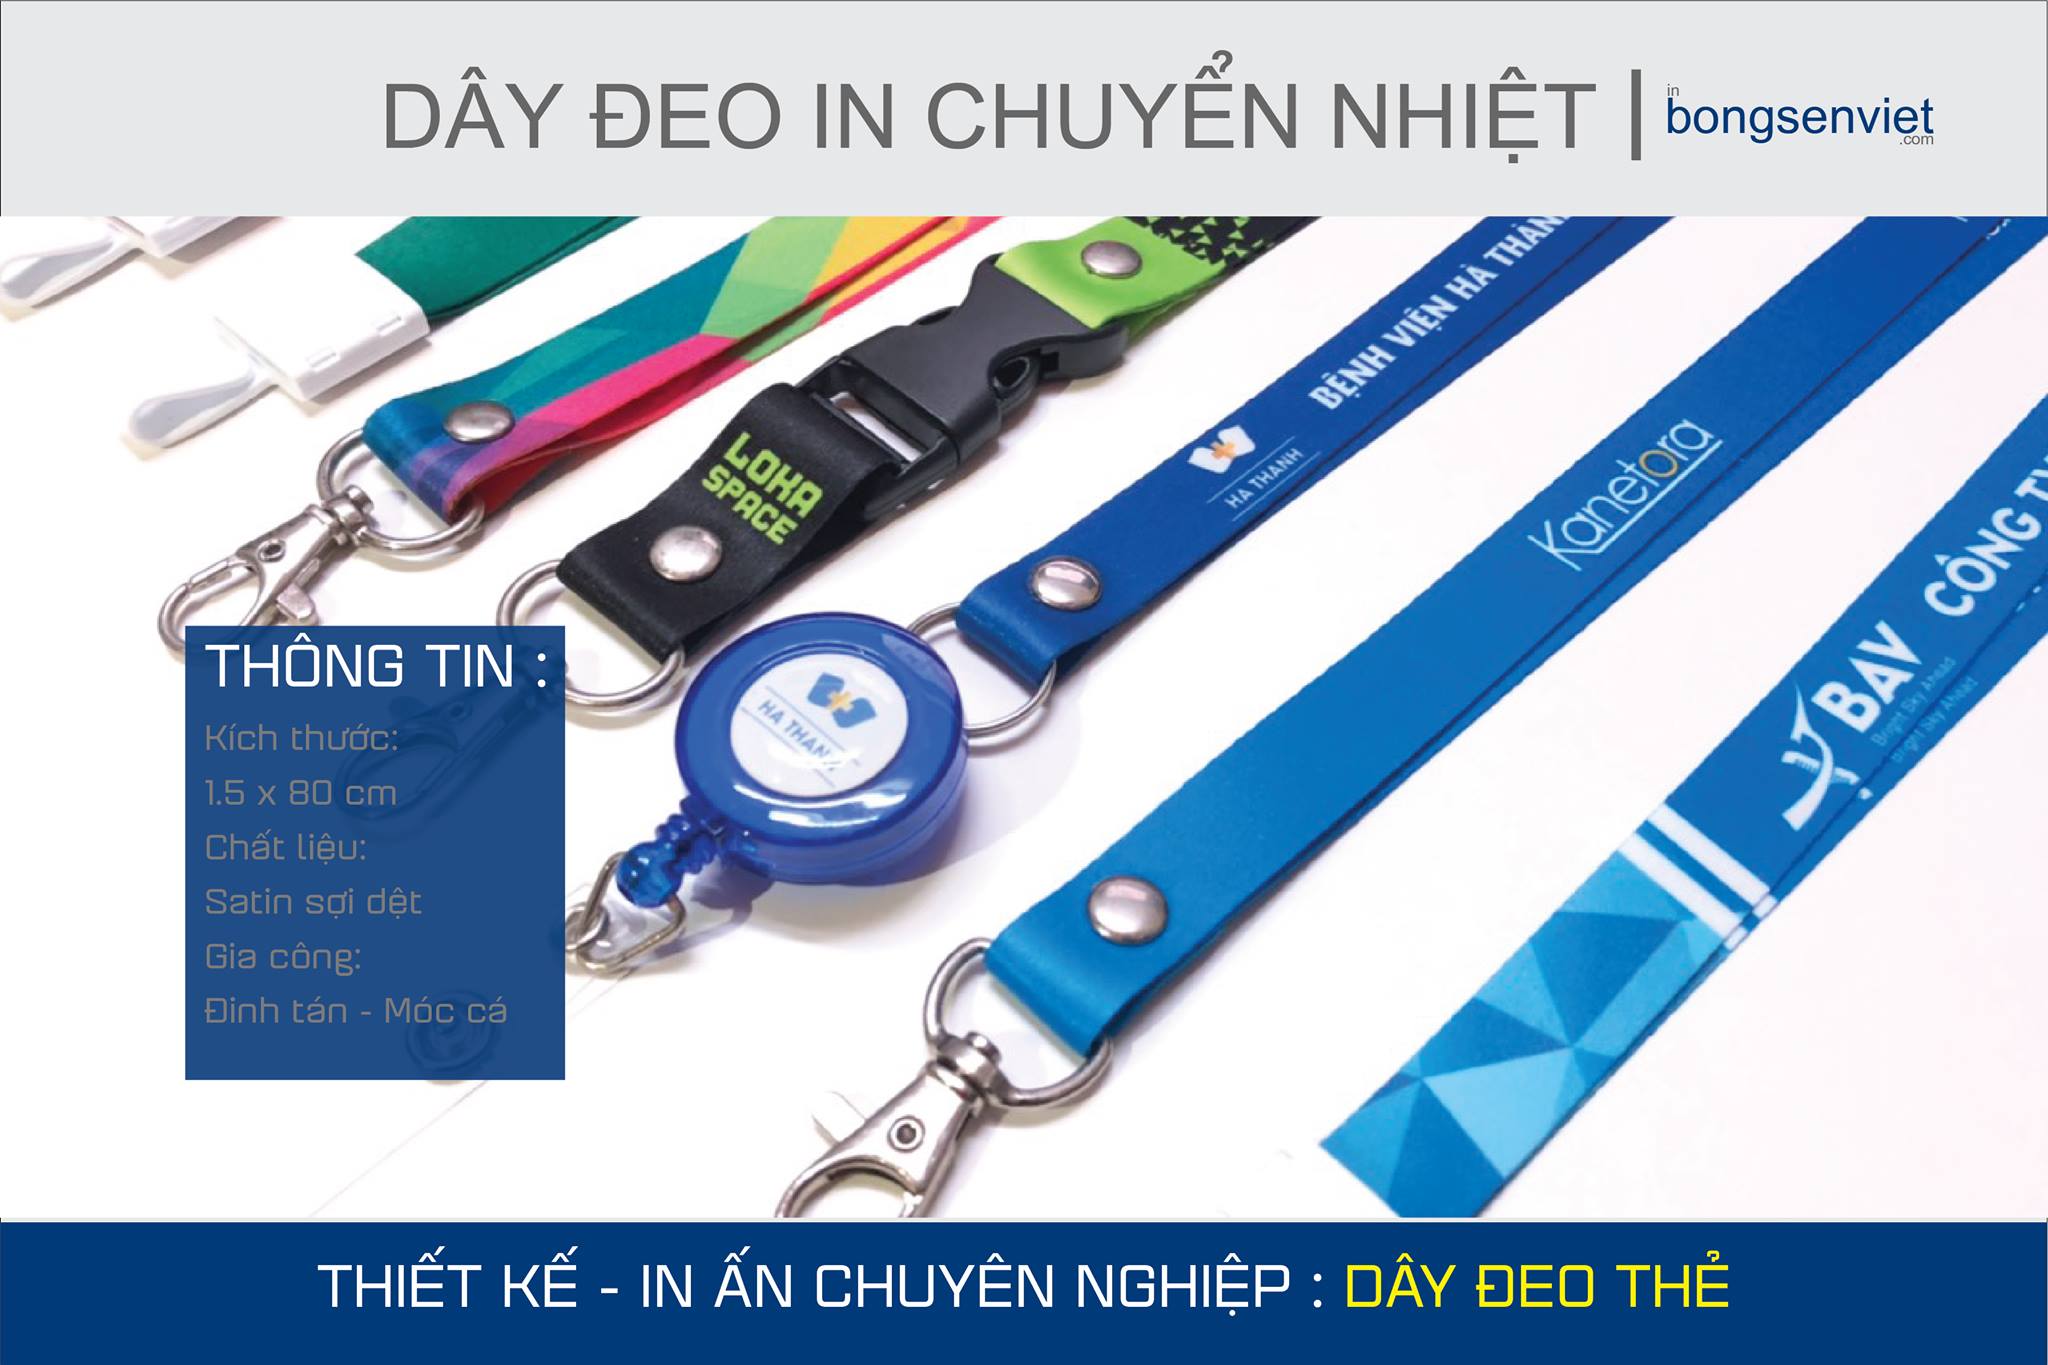 day-deo-the-satin-in-chuyen-nhiet